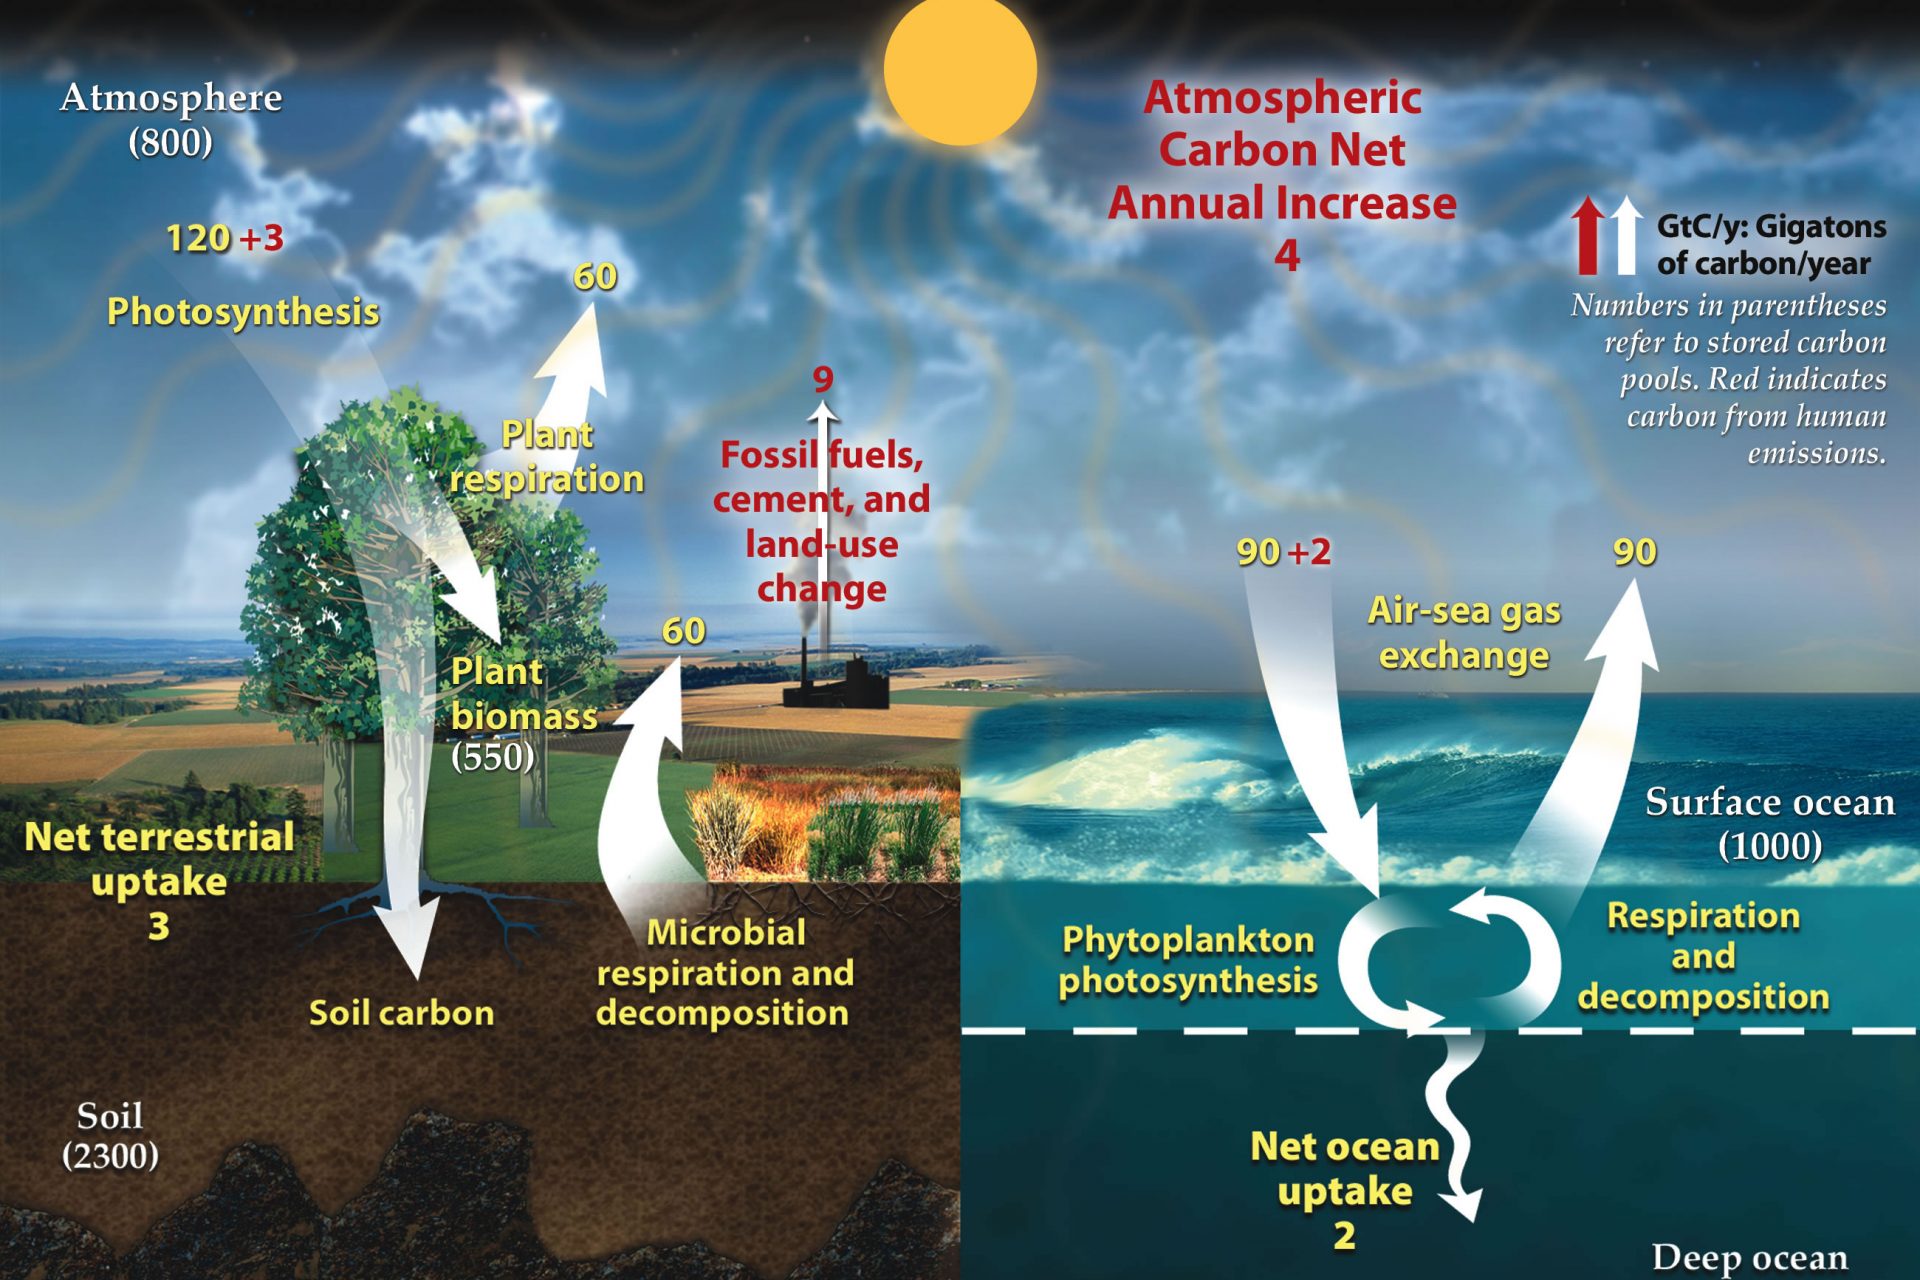 A fundamental altering of climate systems